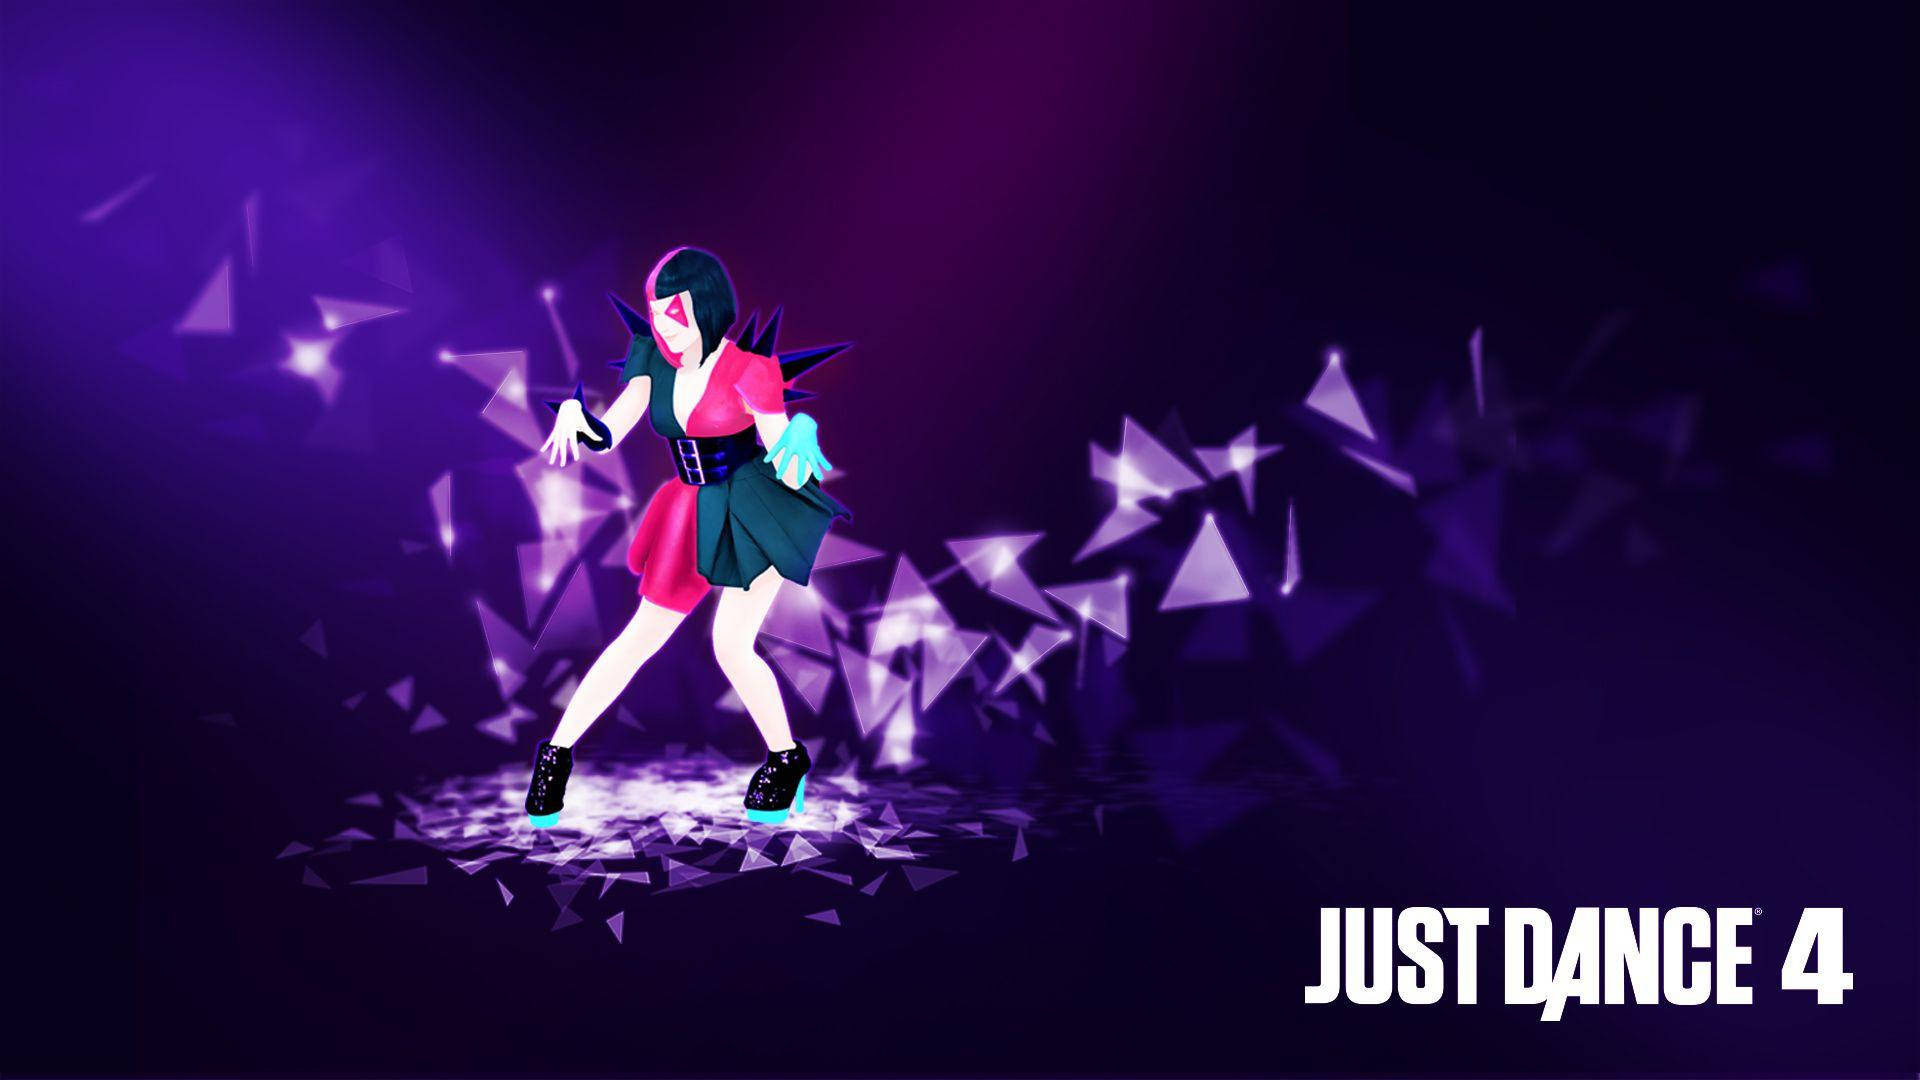 Just Dance 4 Dancer With Floating Triangles Background